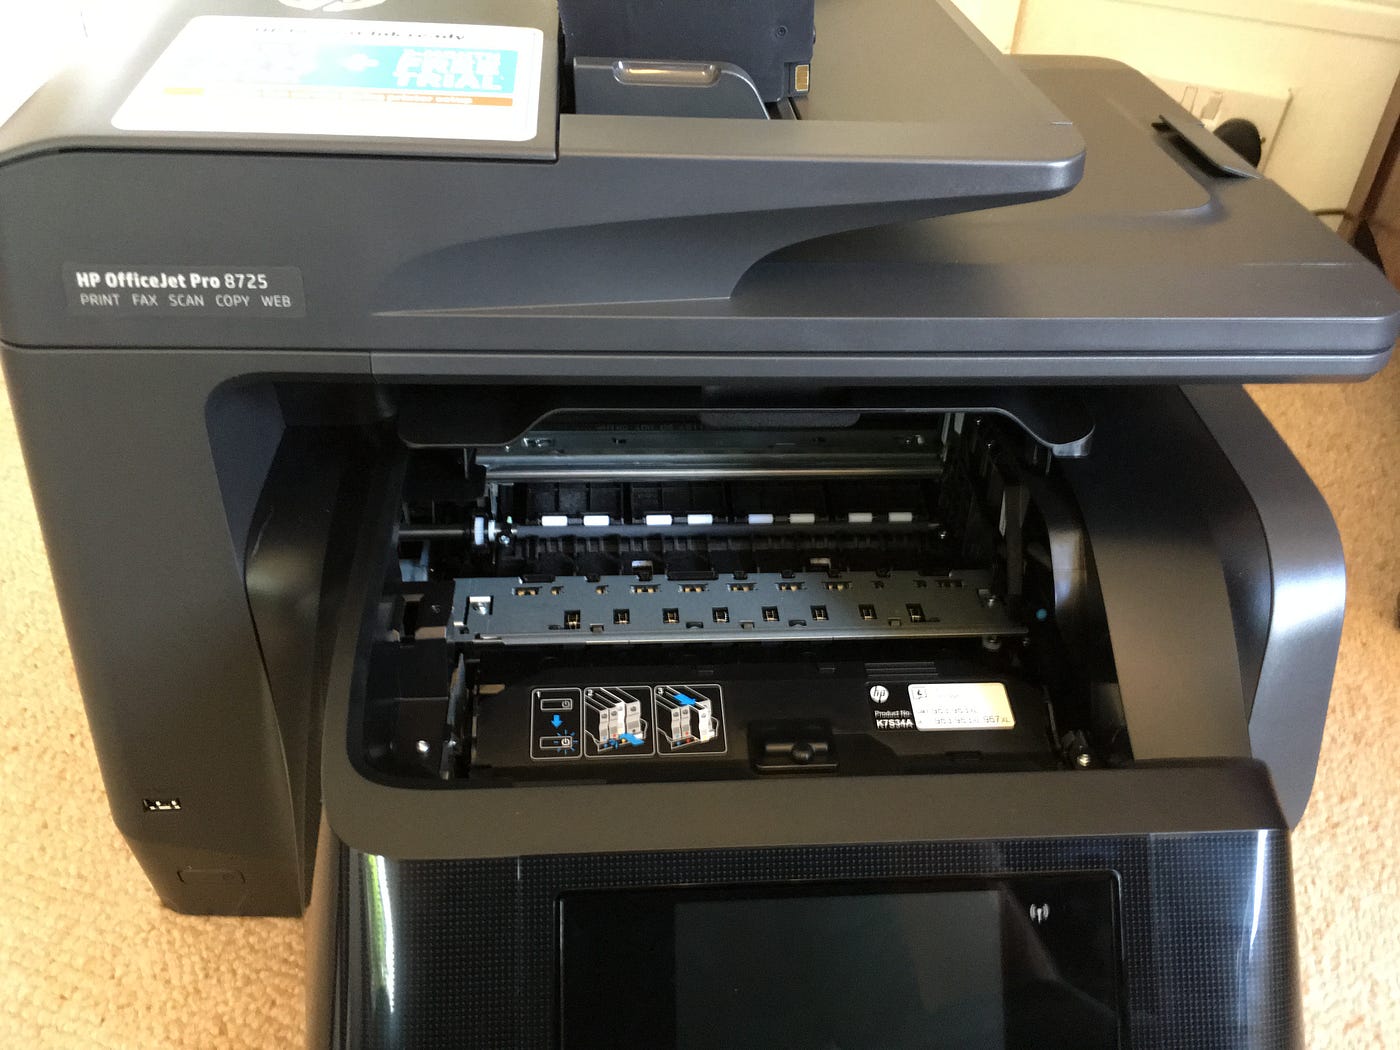 HP OfficeJet Pro 8725. Thanks to the Insiders UK I'm currently… | by  Richard McPartland | Richard McPartland | Life blog